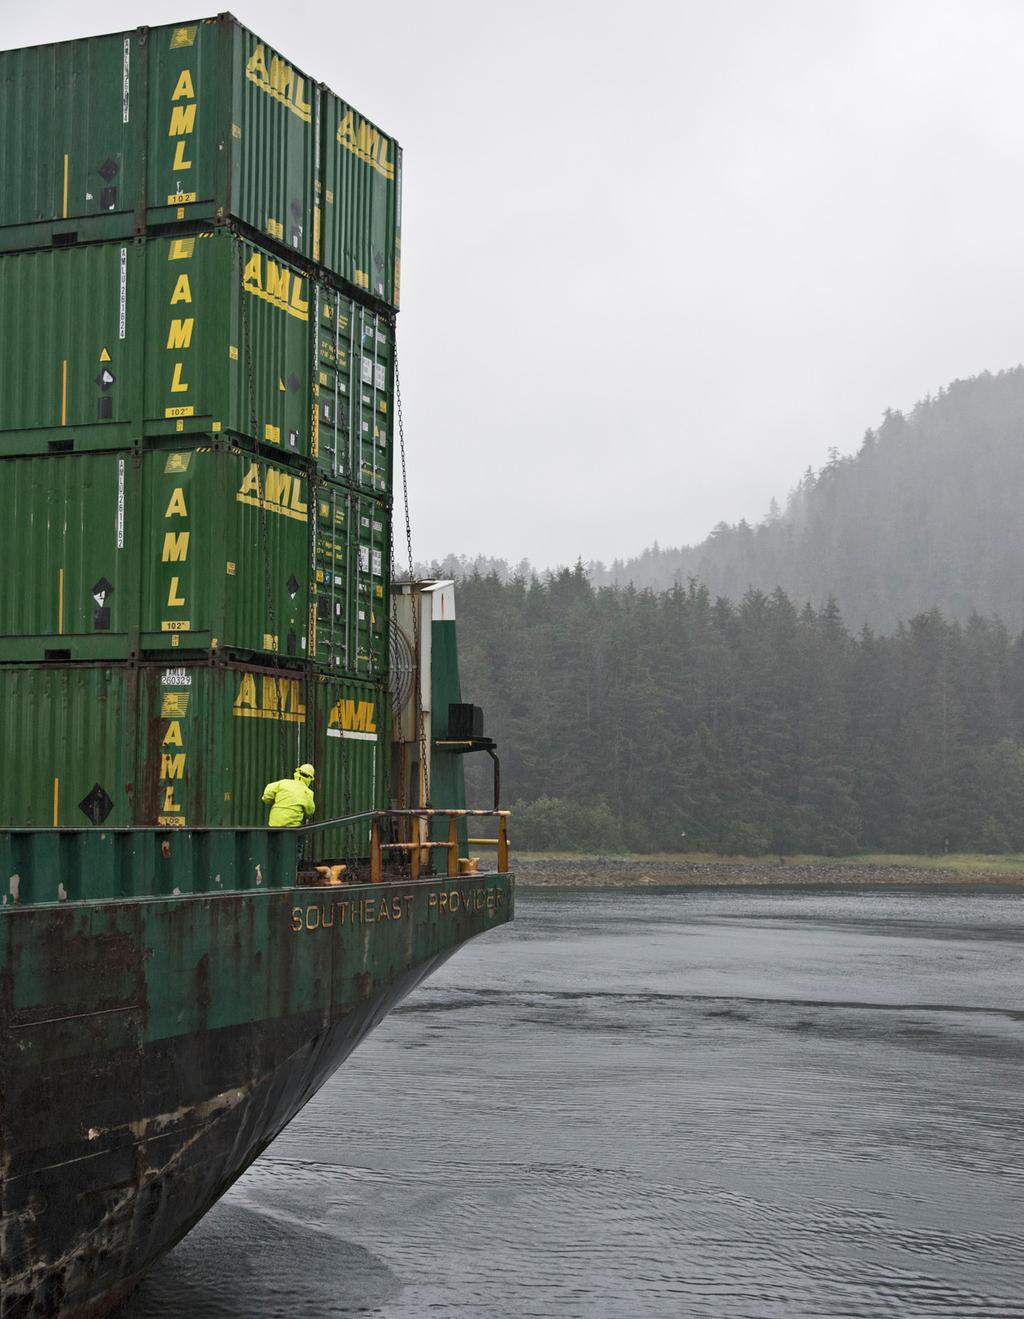 Serving more ports than any other marine carrier Alaska Marine Lines is a marine transportation company providing barge service to and from Alaska and Hawaii.